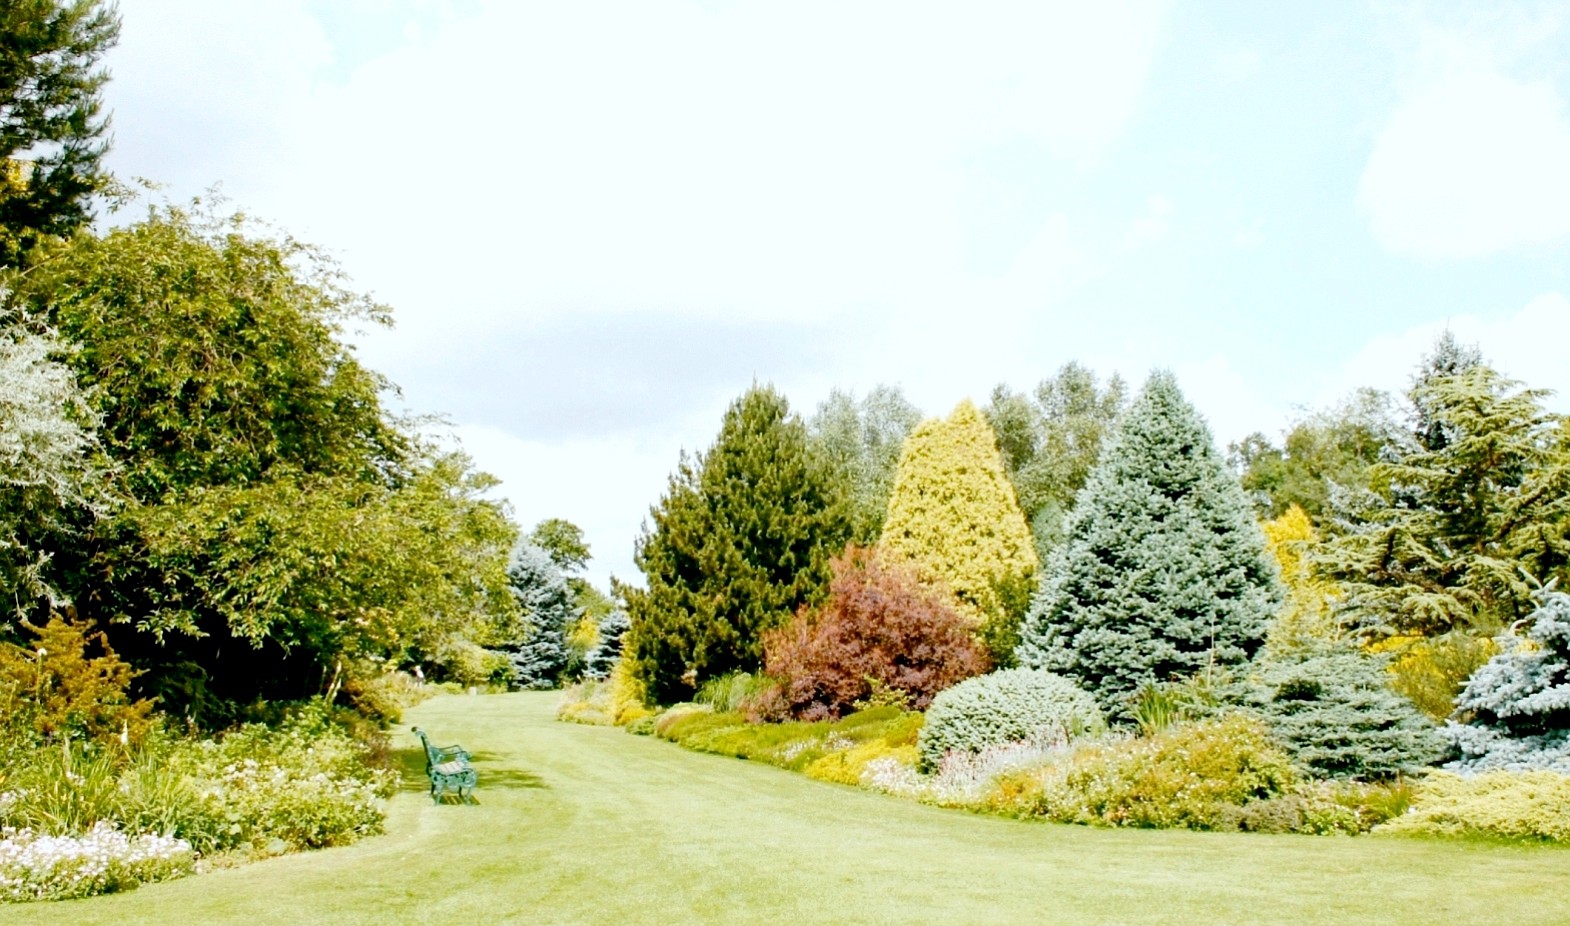 ROBB ROSSER
Plant-filled borders are perfectly framed by a lush, well-mown lawn.